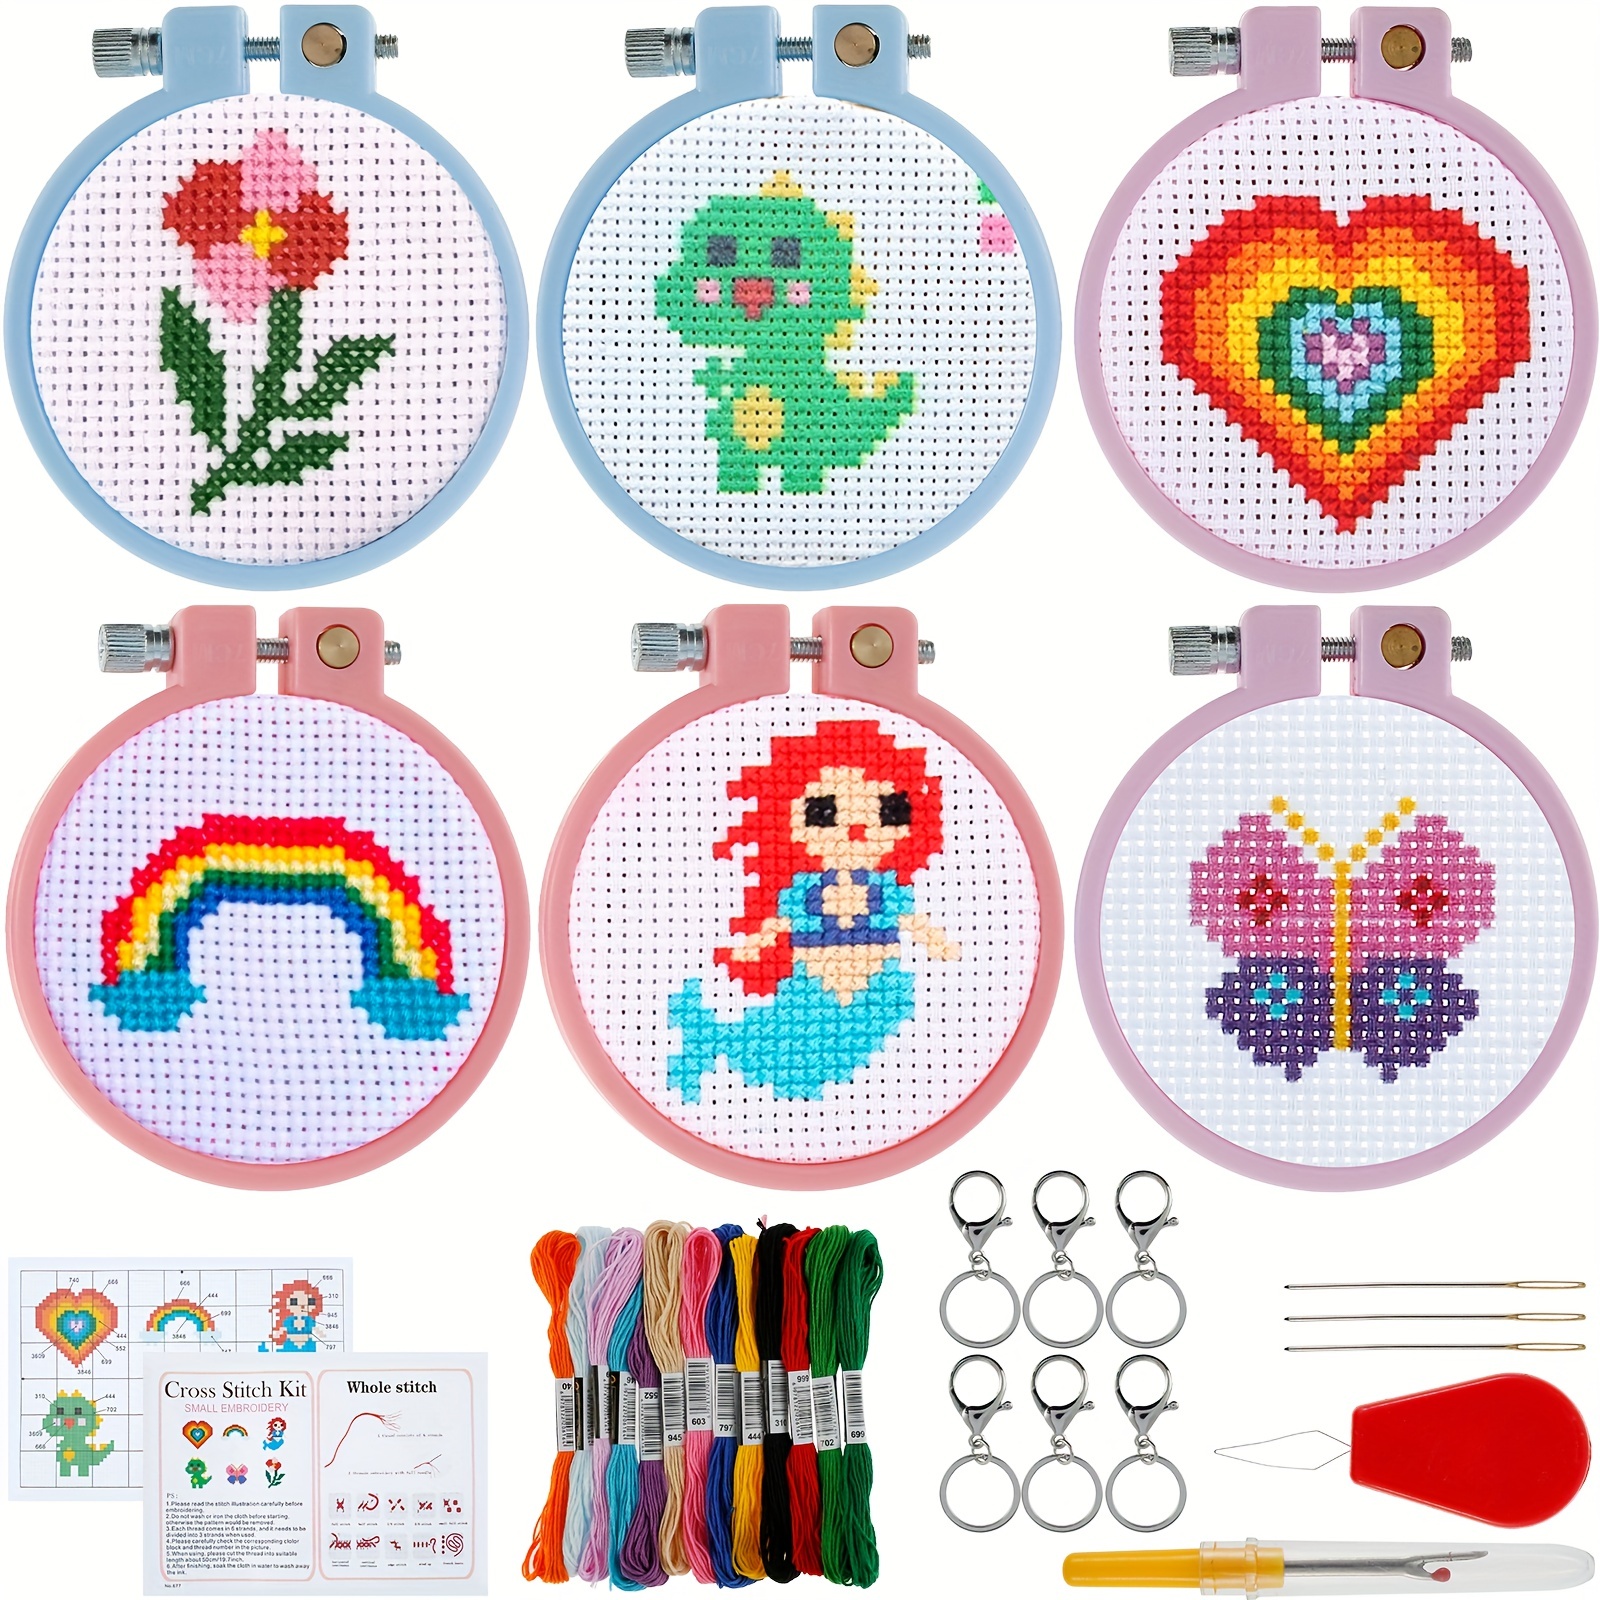 REEWISLY 4 pcs of Embroidery Starter kit with Patterns and Instructions,  DIY Adult Beginner Cross Stitch Kits, Including 2 Plastic Embroidery Rings,  1